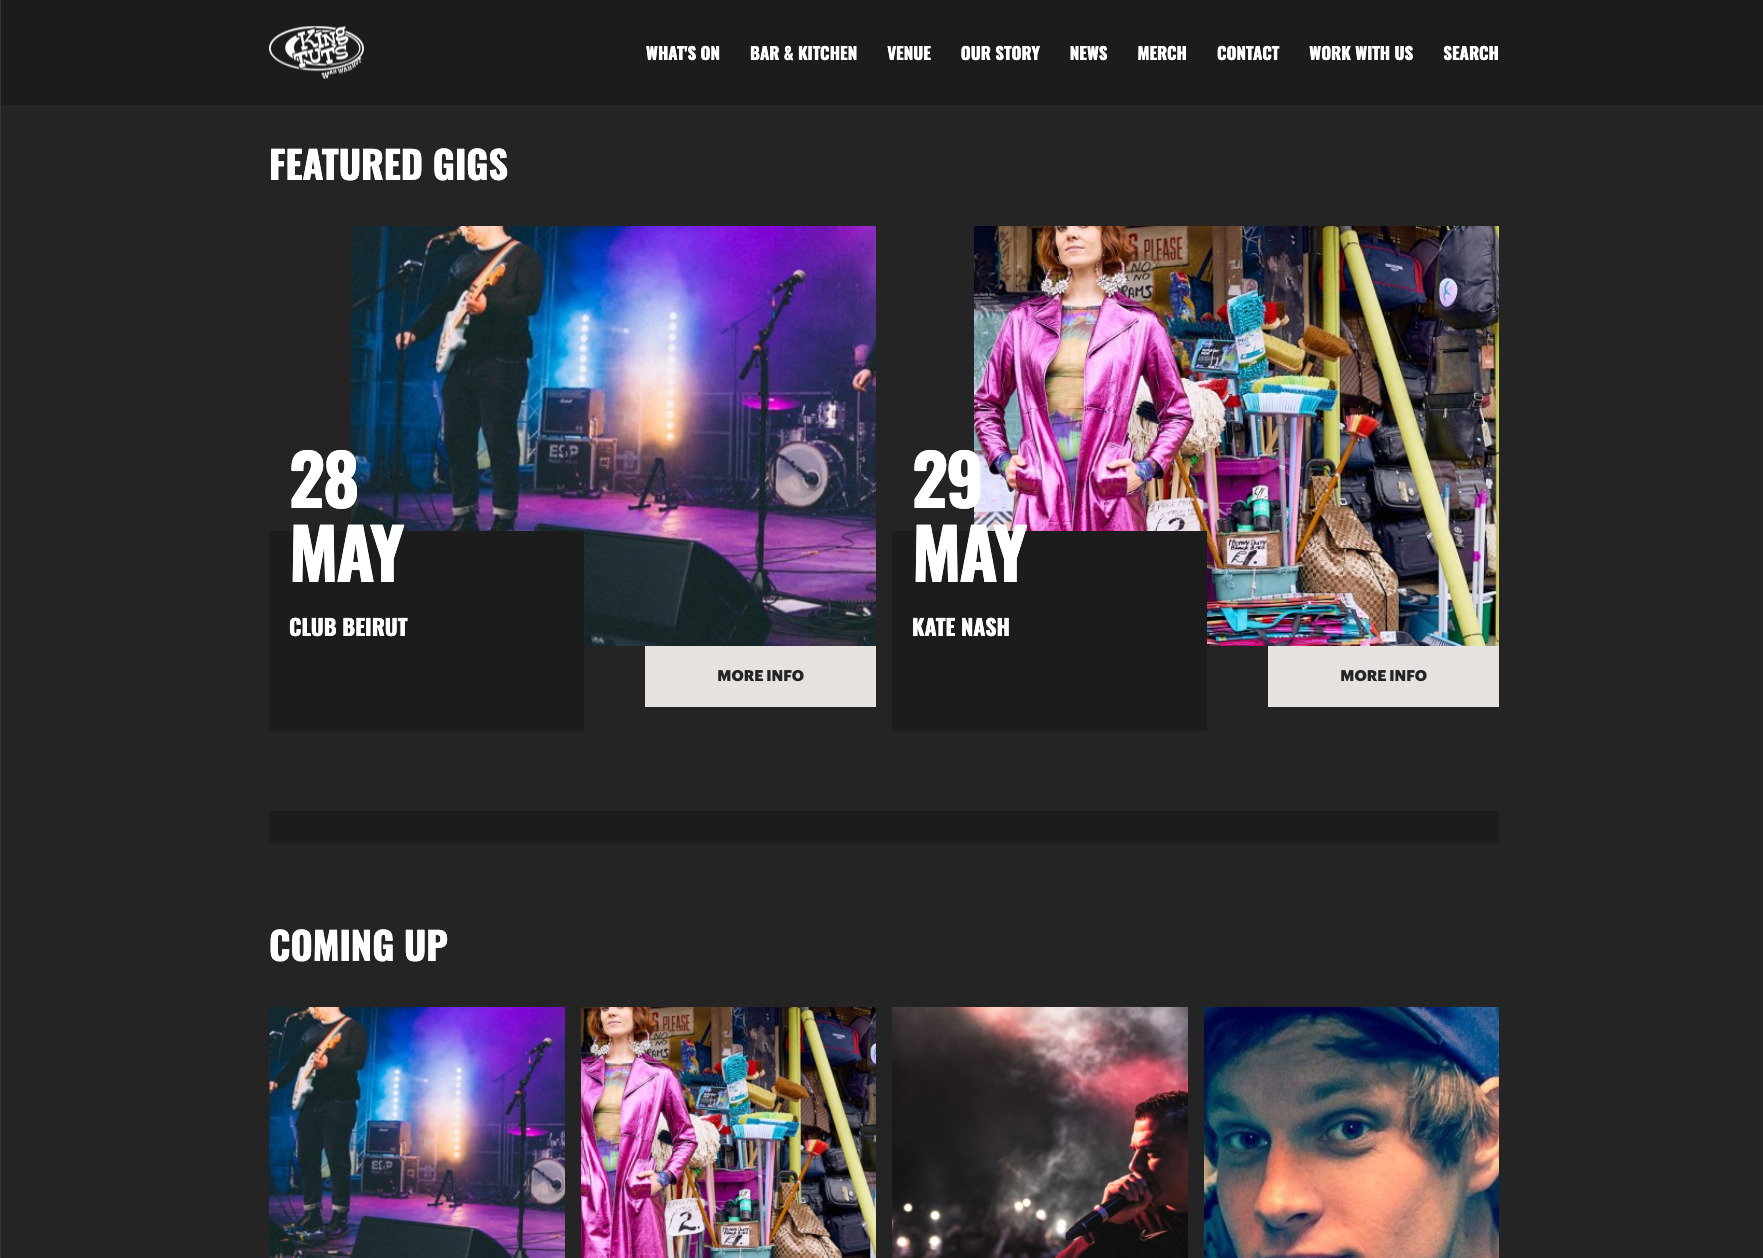 Example of an artist profile page